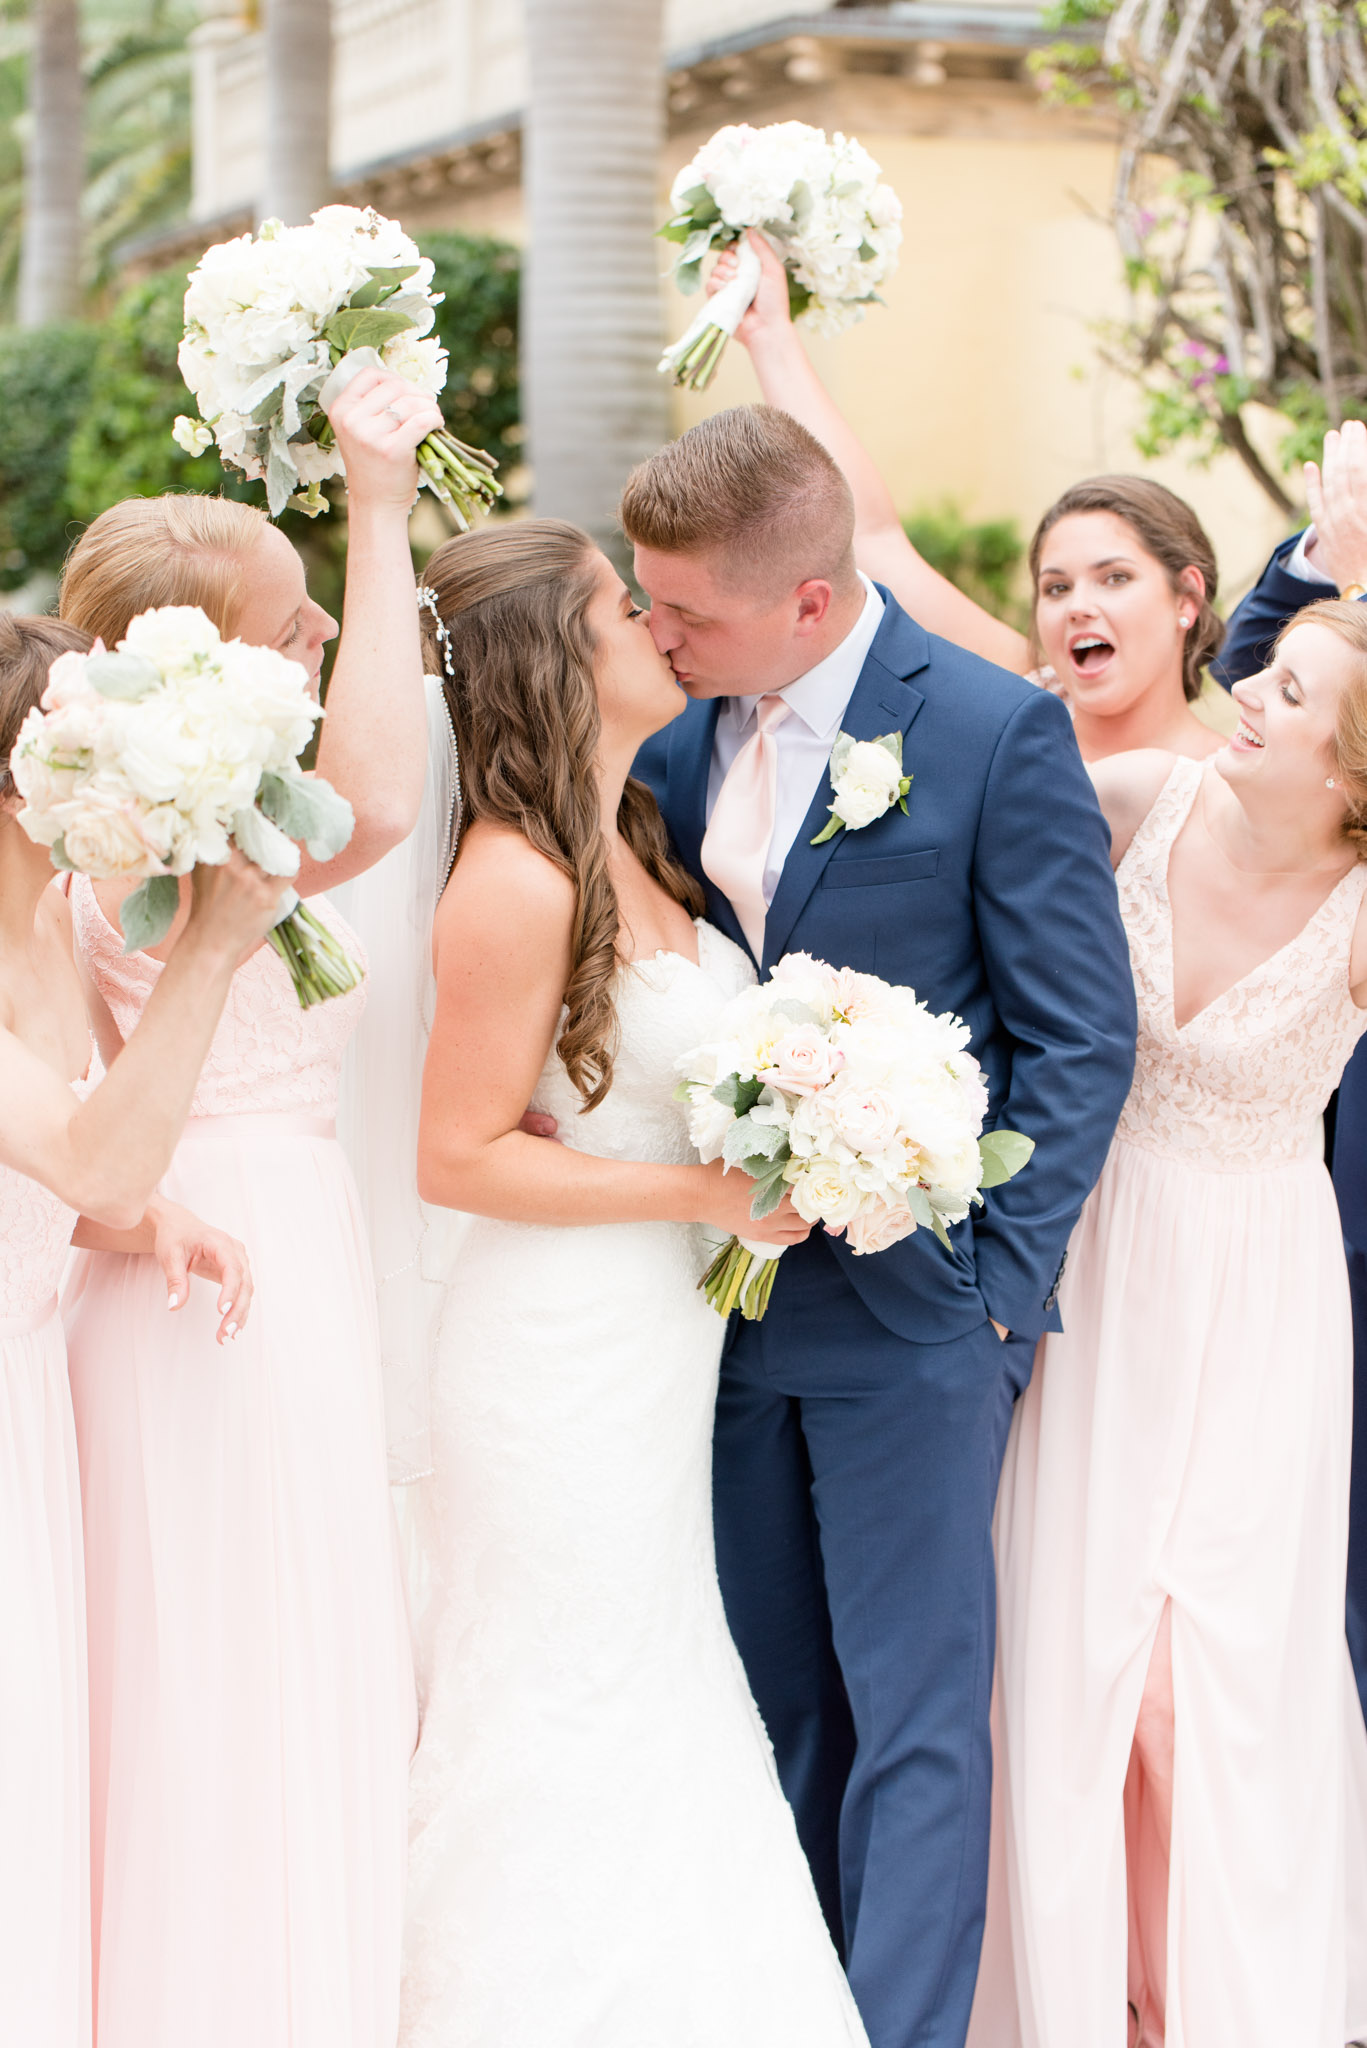 Bride and groom kiss while friends cheer.